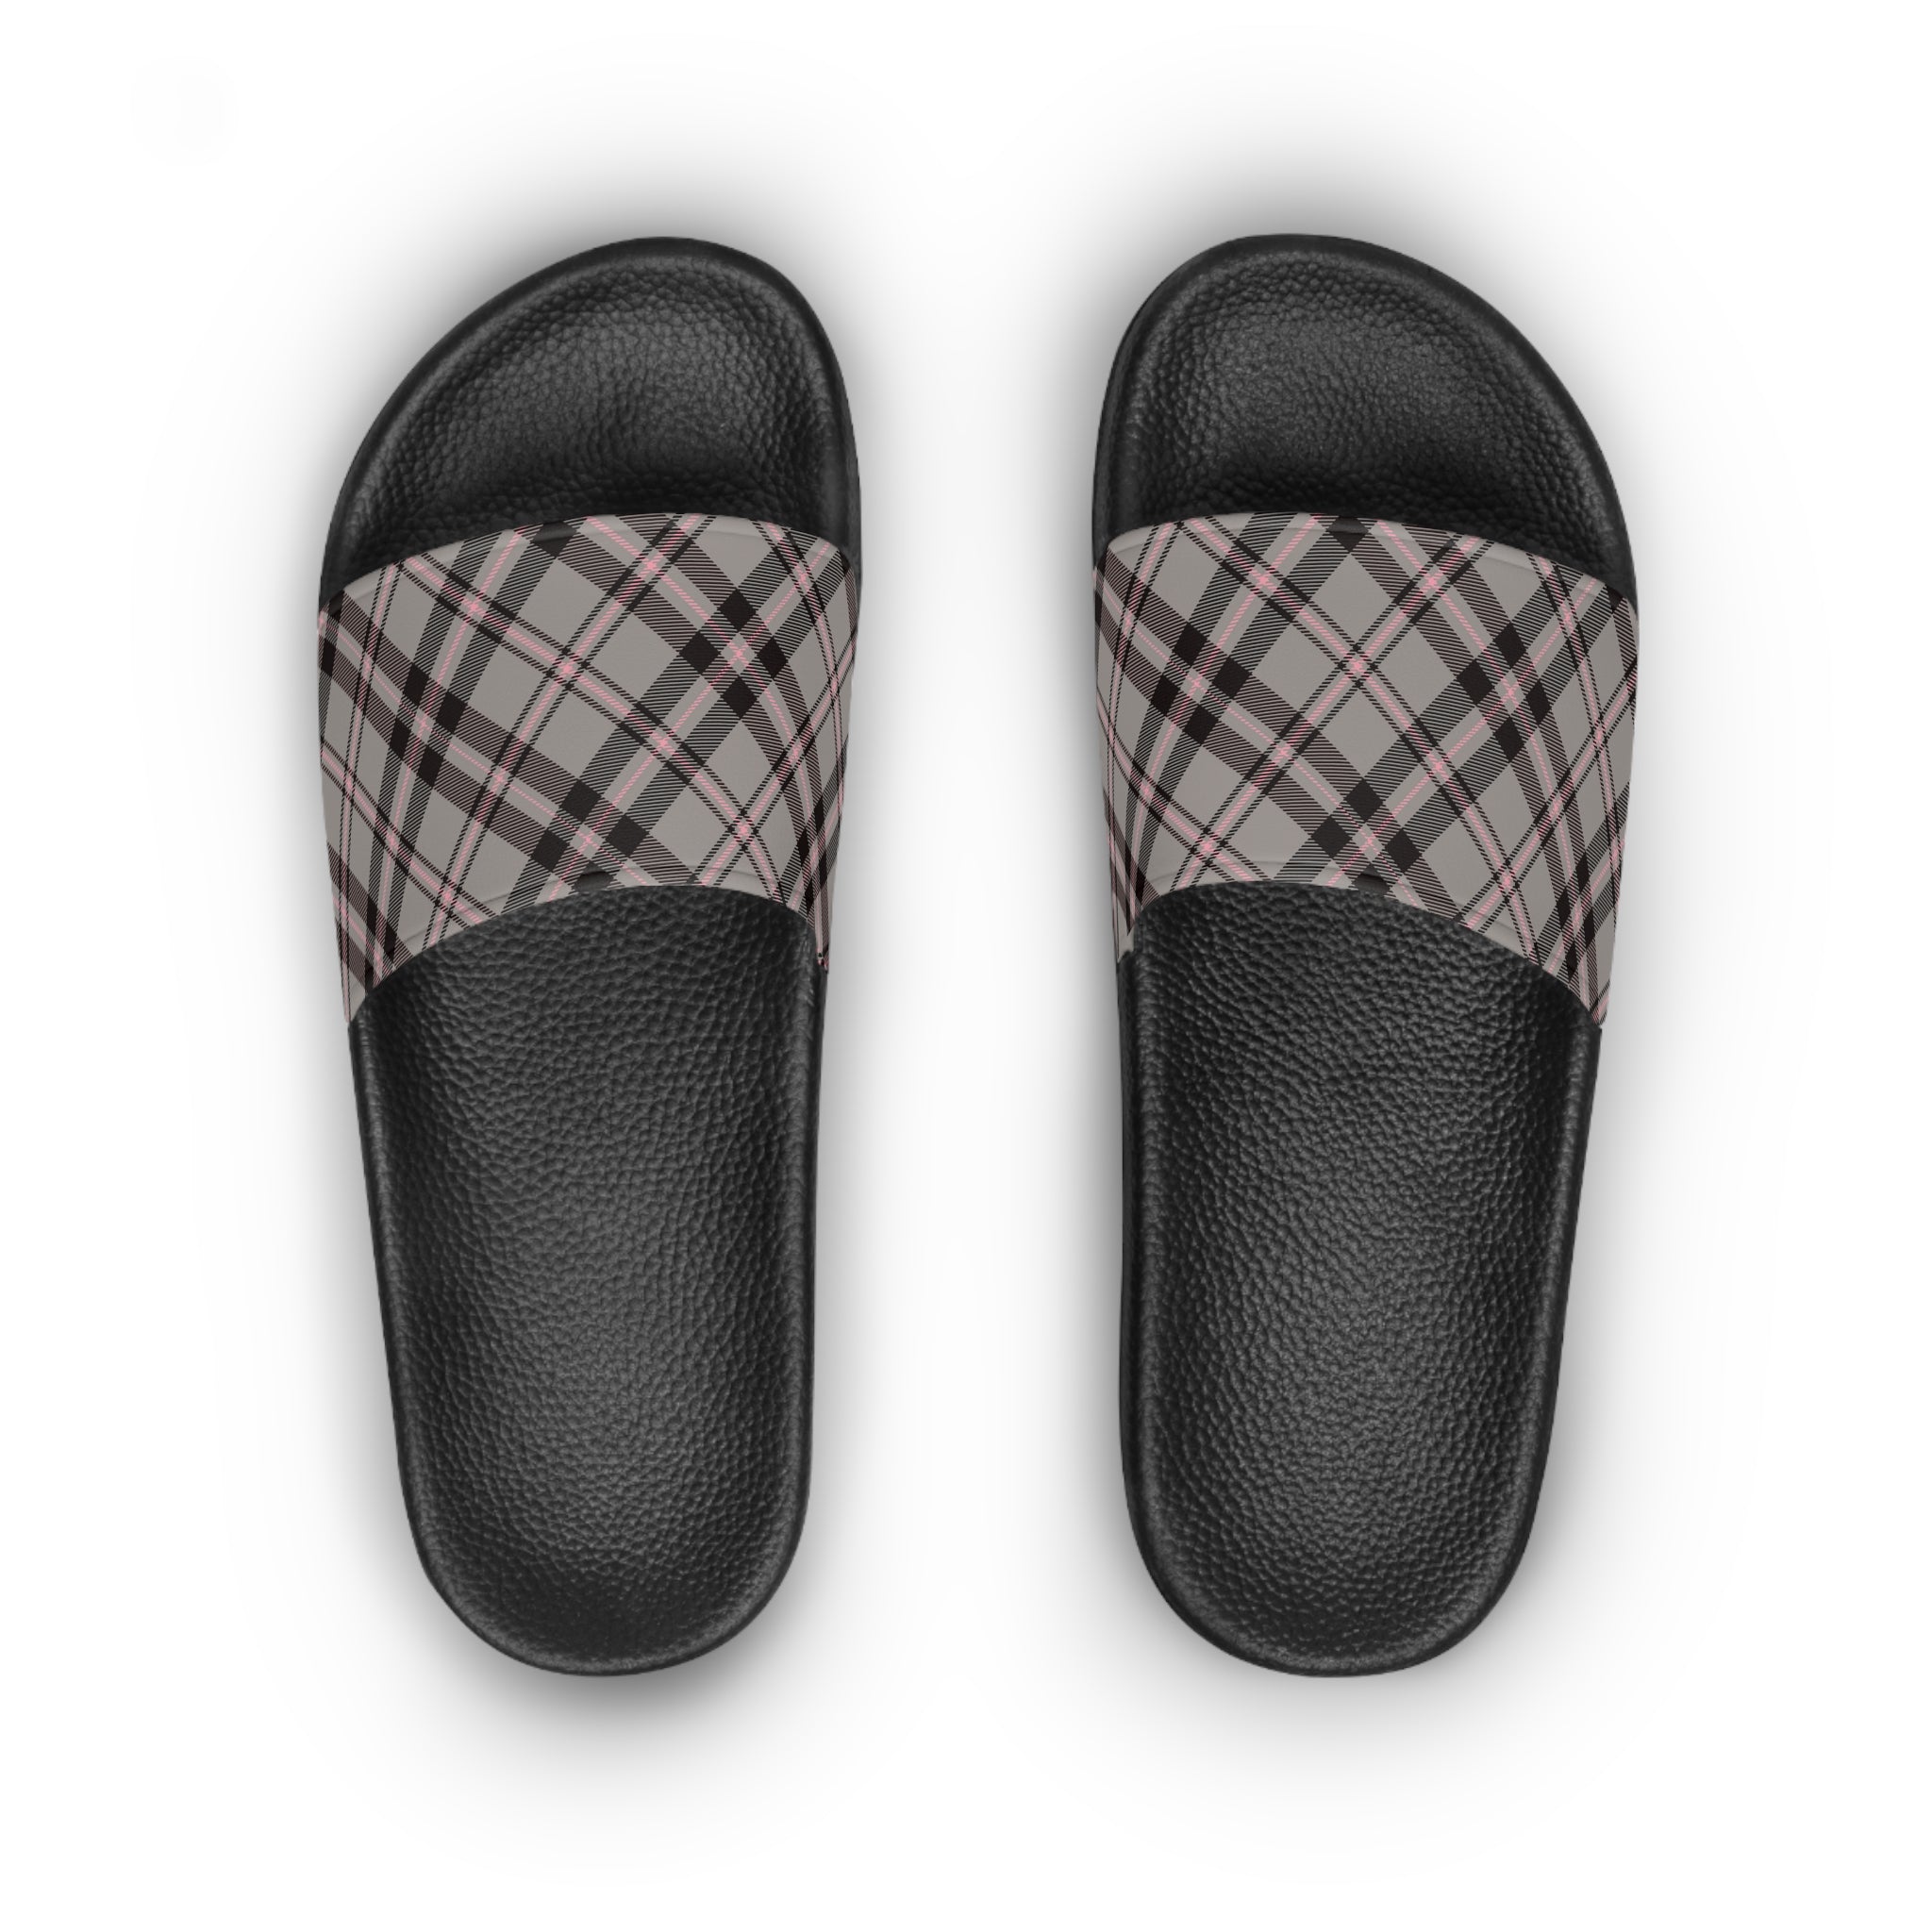  Abby Pattern in Gray and Pink Women's Slide Sandals, Slide Sandals for Women, Plaid Slip Ons ShoesBlacksoleUS6